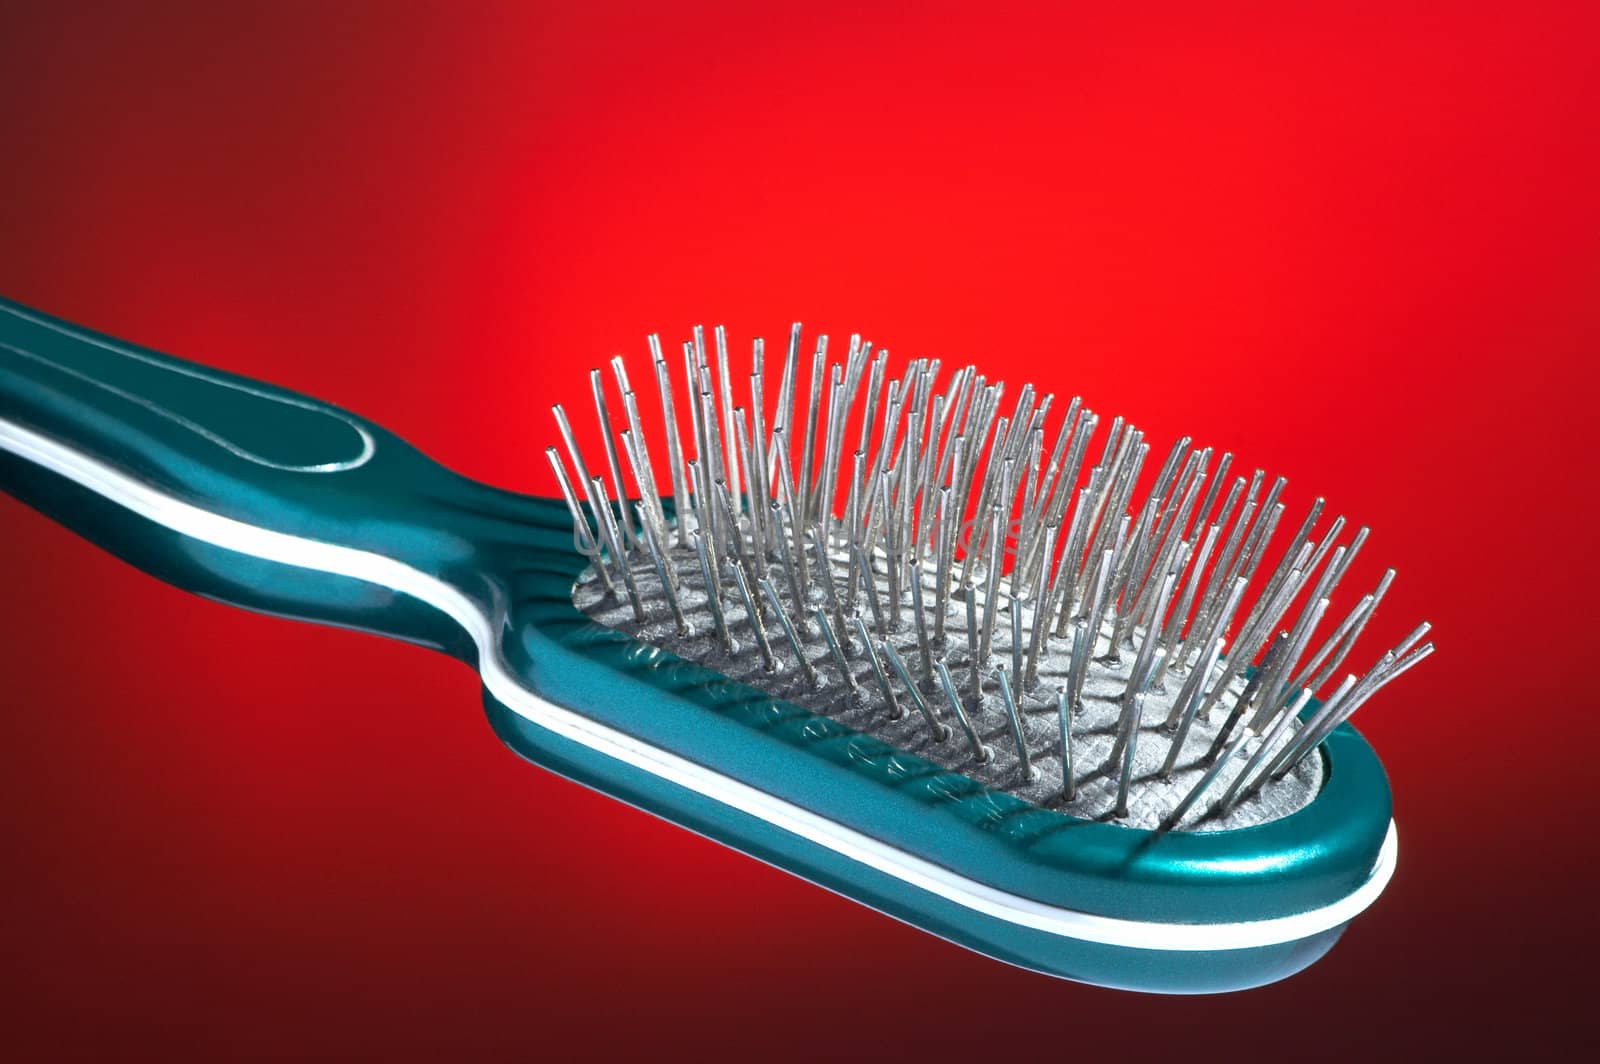 Hairbrush for hair by terex